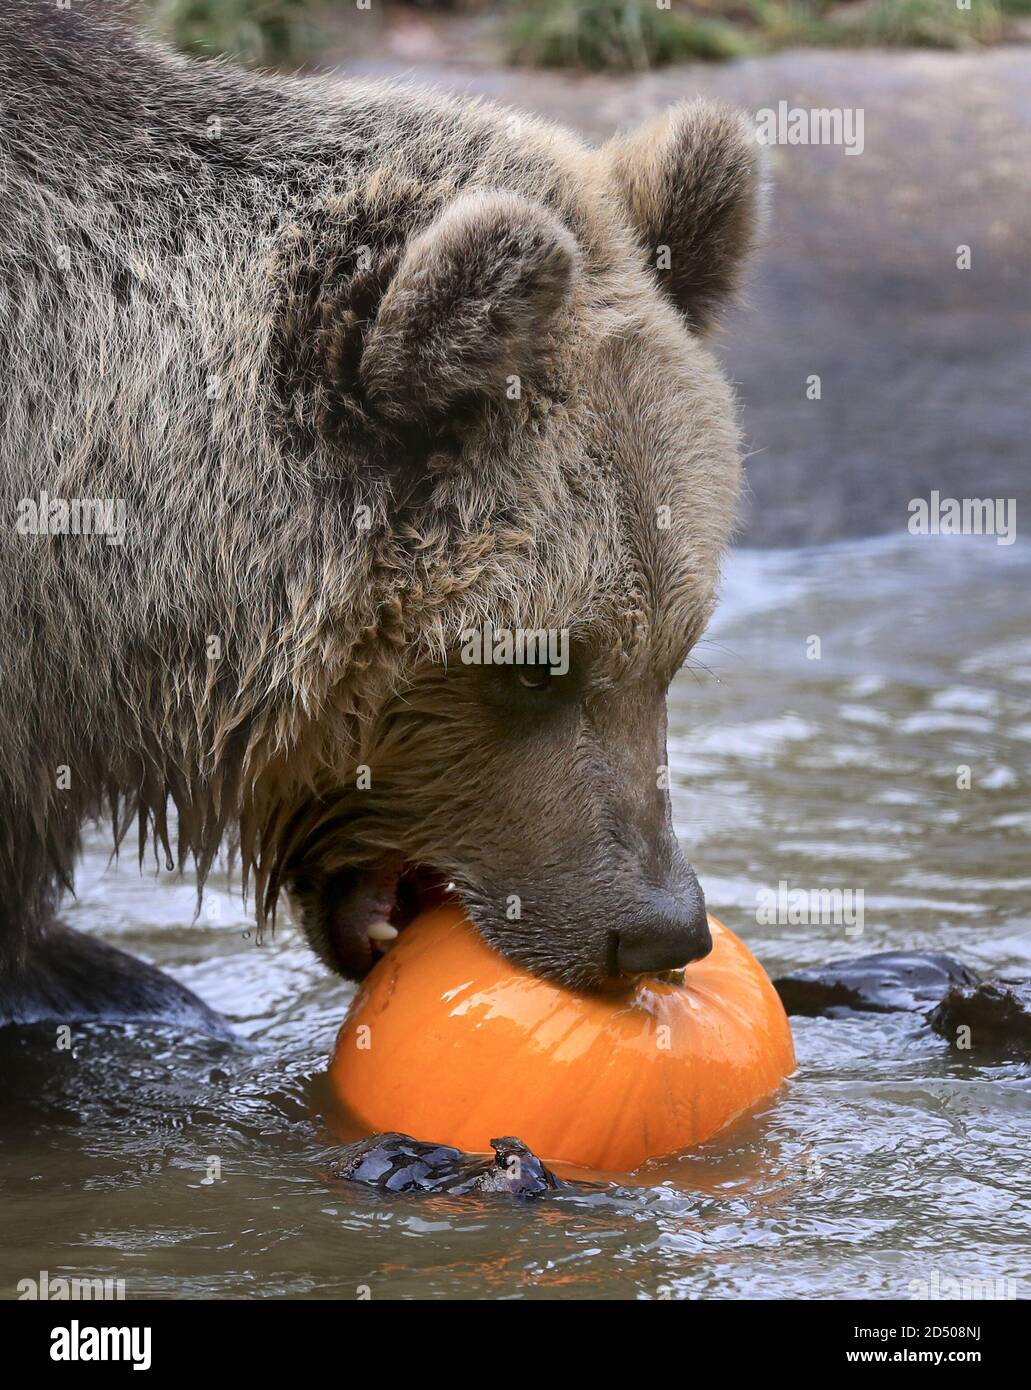 Mish, one of two rescued 19 month old brown bear cubs enjoys playing with a pumpkin as part of their enrichment at the Wildwood Trust in Herne Bay, Kent. The orphaned pair who were found abandoned and alone in a snowdrift in the Albanian mountains have been acclimatising at the trust to their new life in the UK before moving to a permanent home next year. Stock Photo